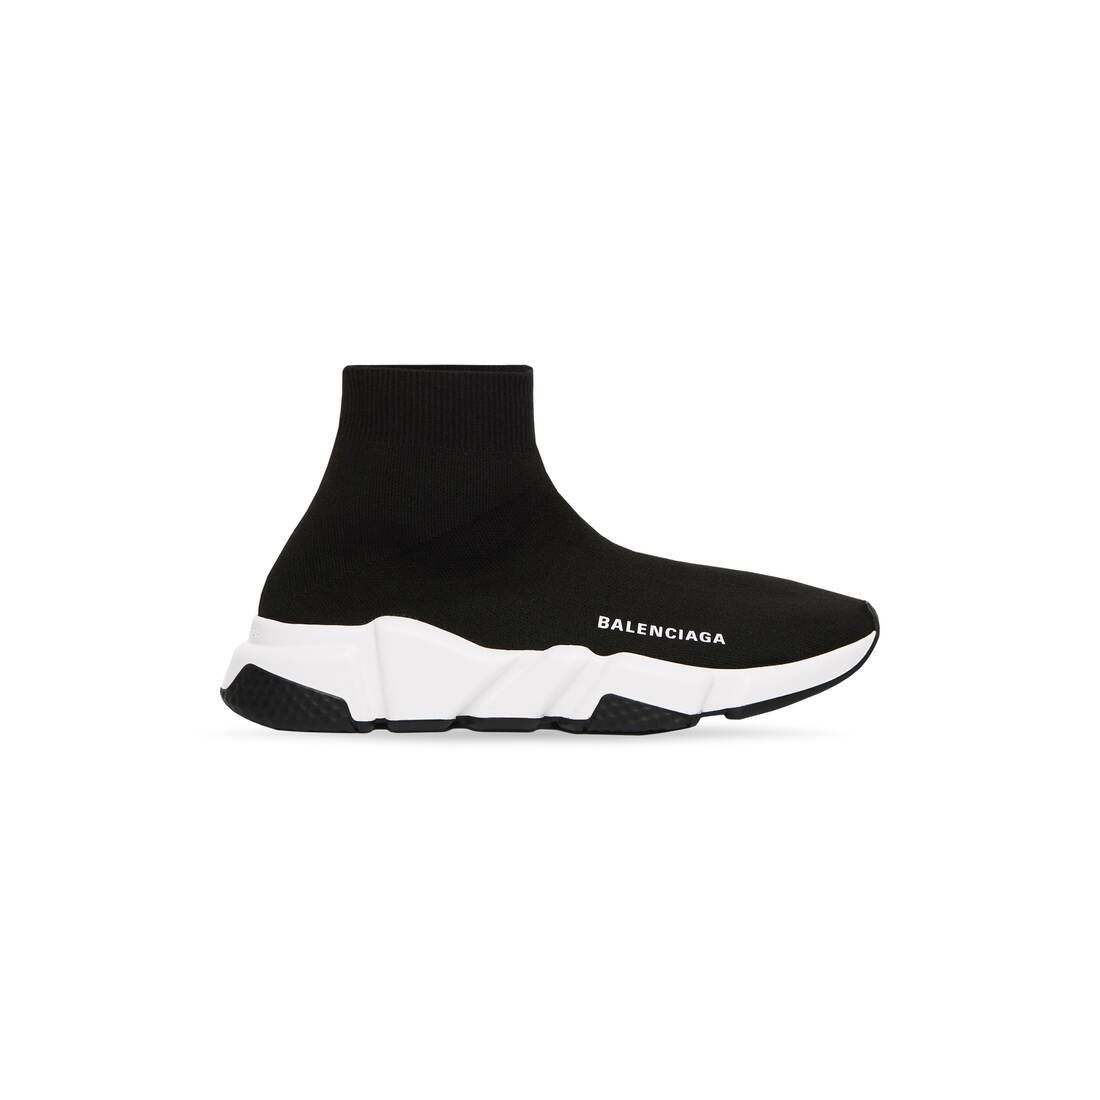 Speed Recycled Knit Sneaker in black knit, white and black sole unit | Balenciaga